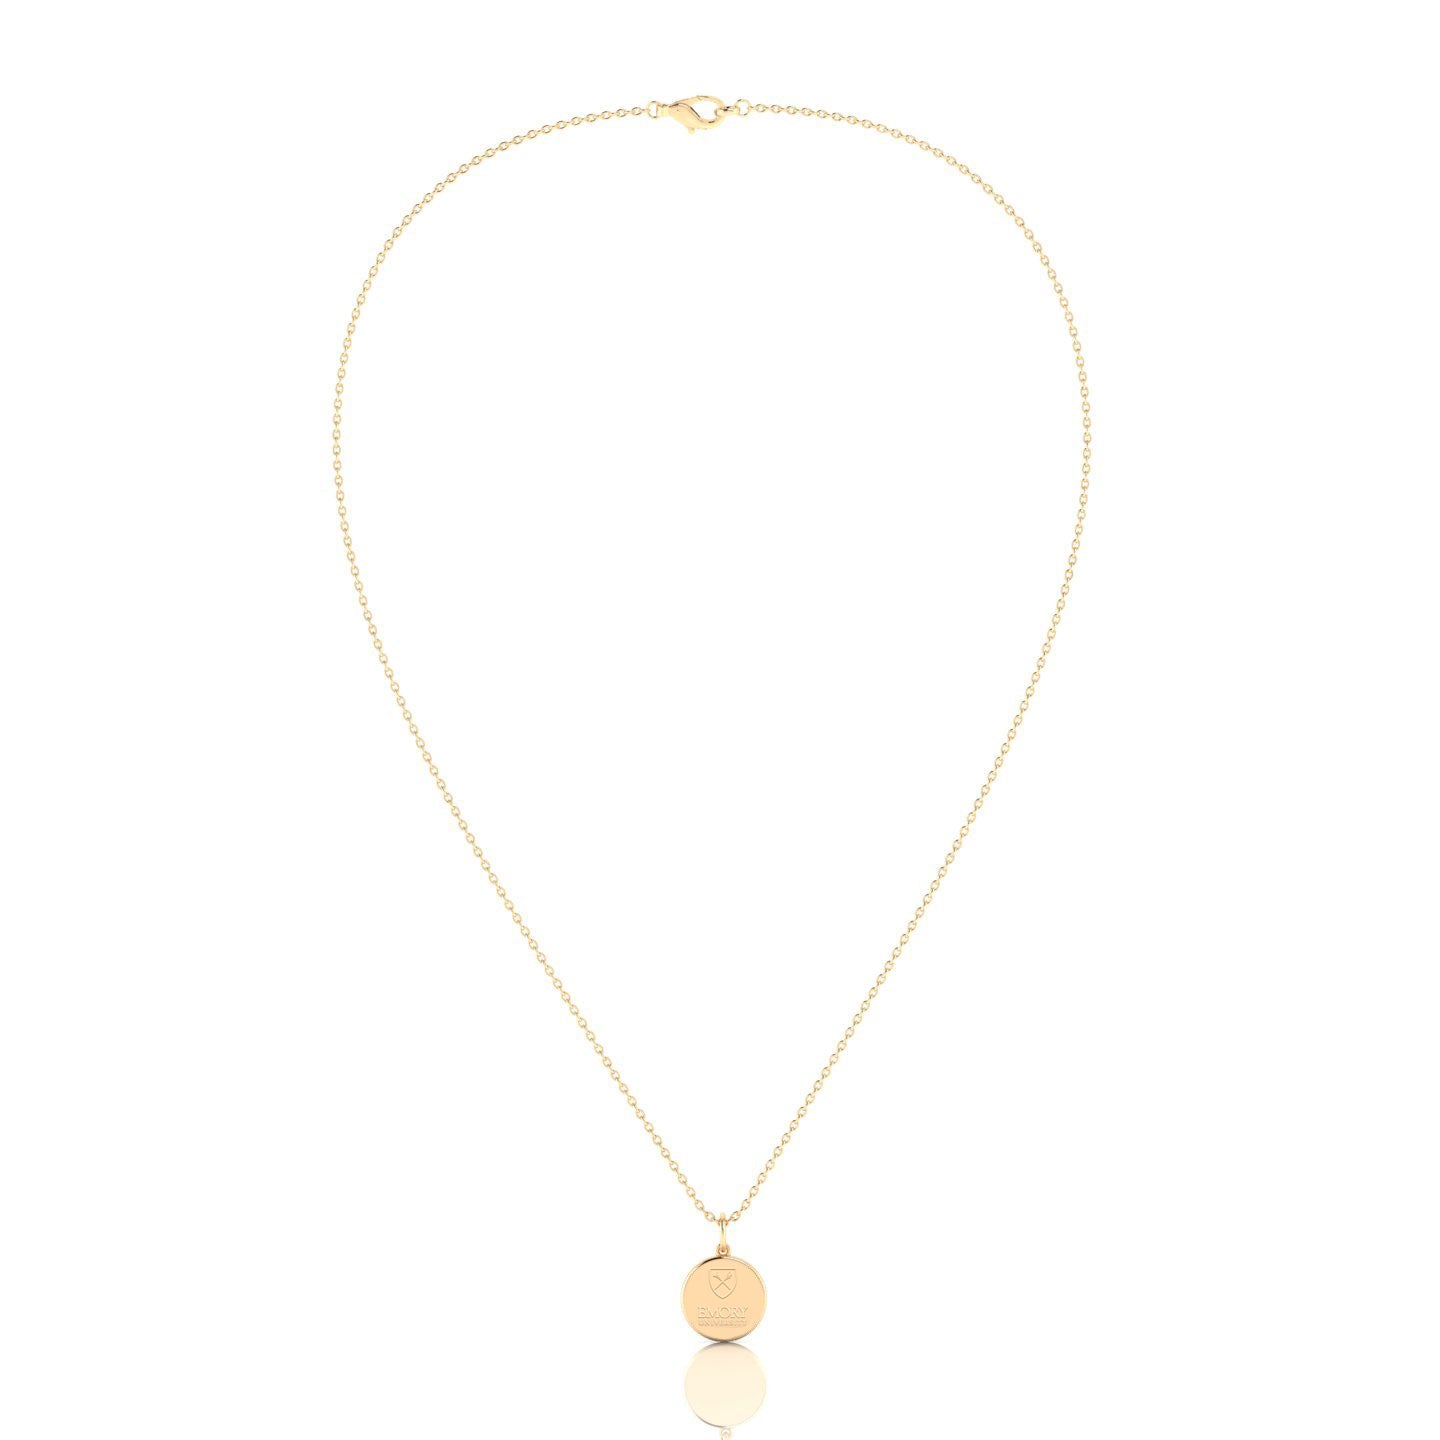 A large circle pendant in gold vermeil. The pendant features a raised Emory University seal in the center of the circle. Gold vermeil is a type of jewelry that is made with a layer of gold bonded to a base metal.